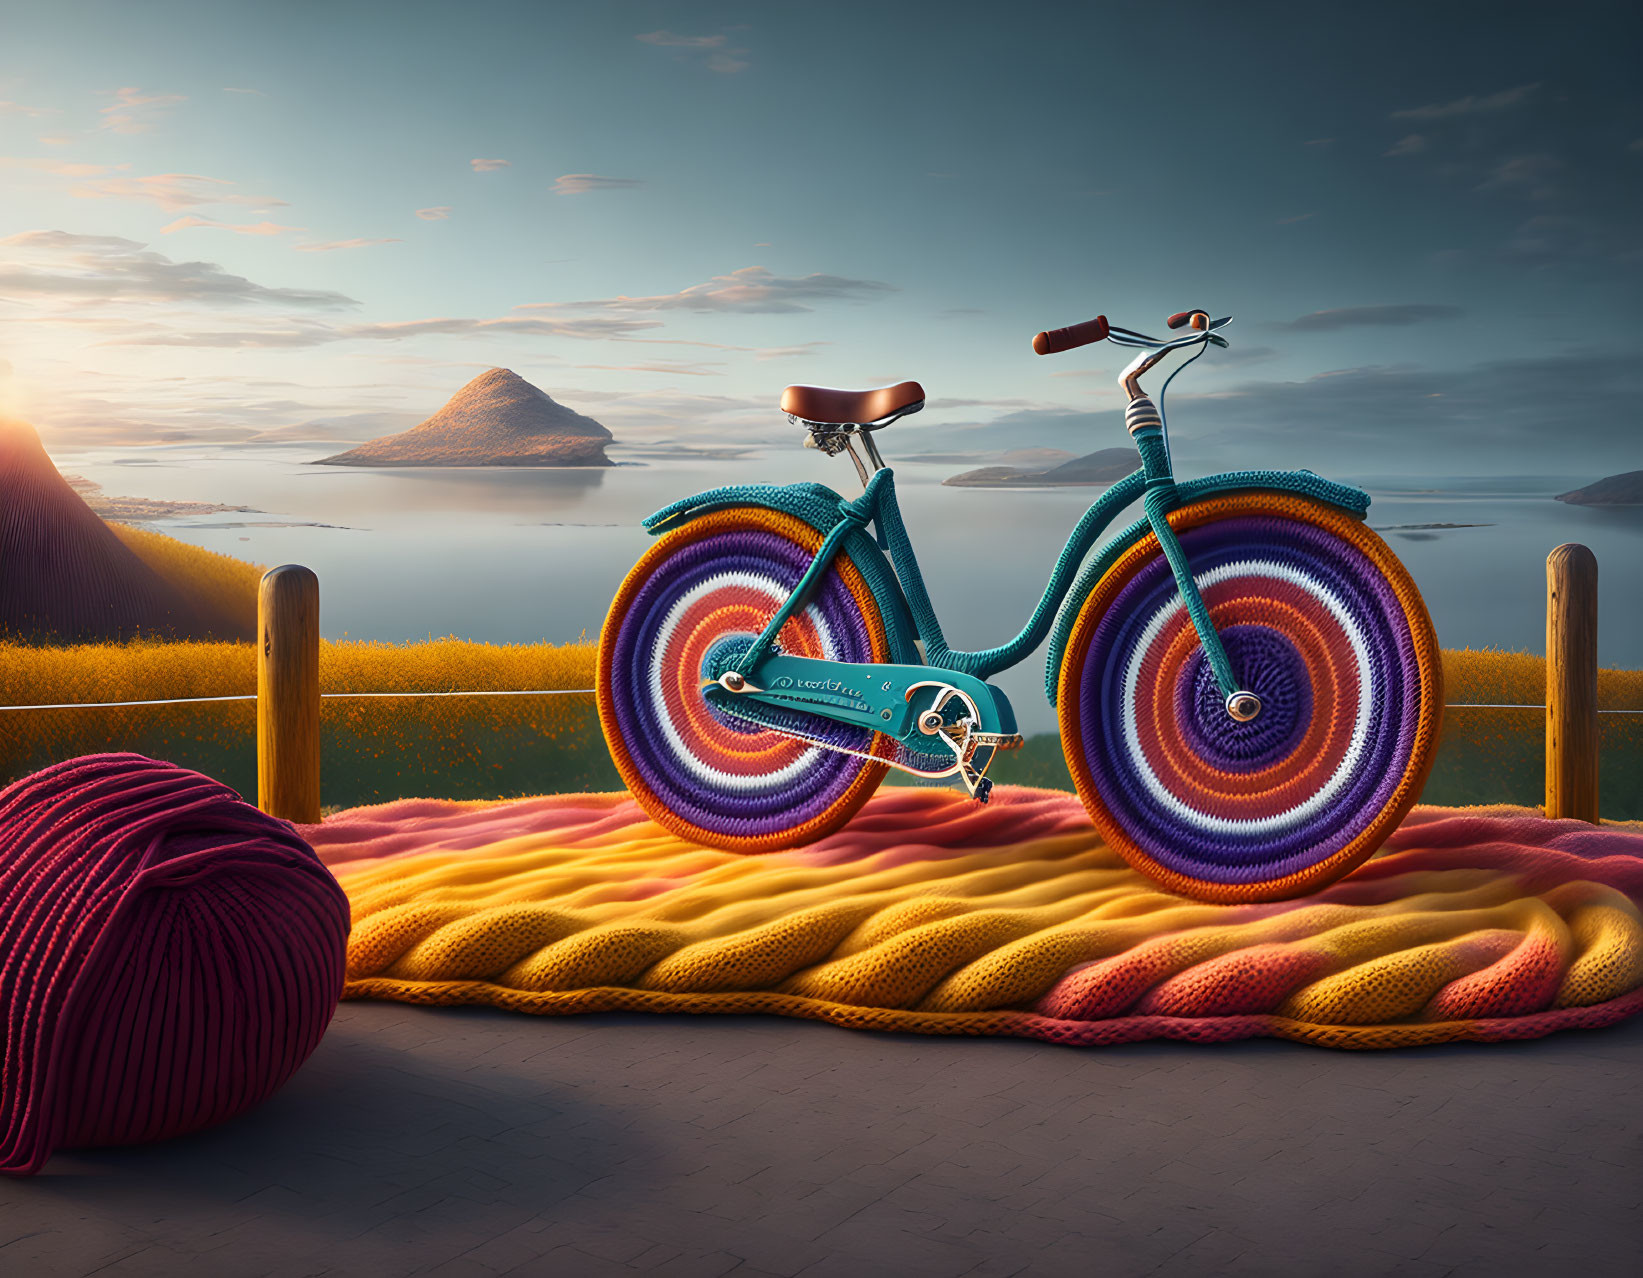 Surreal image of colorful bicycle on vibrant knitted ground by serene lakescape